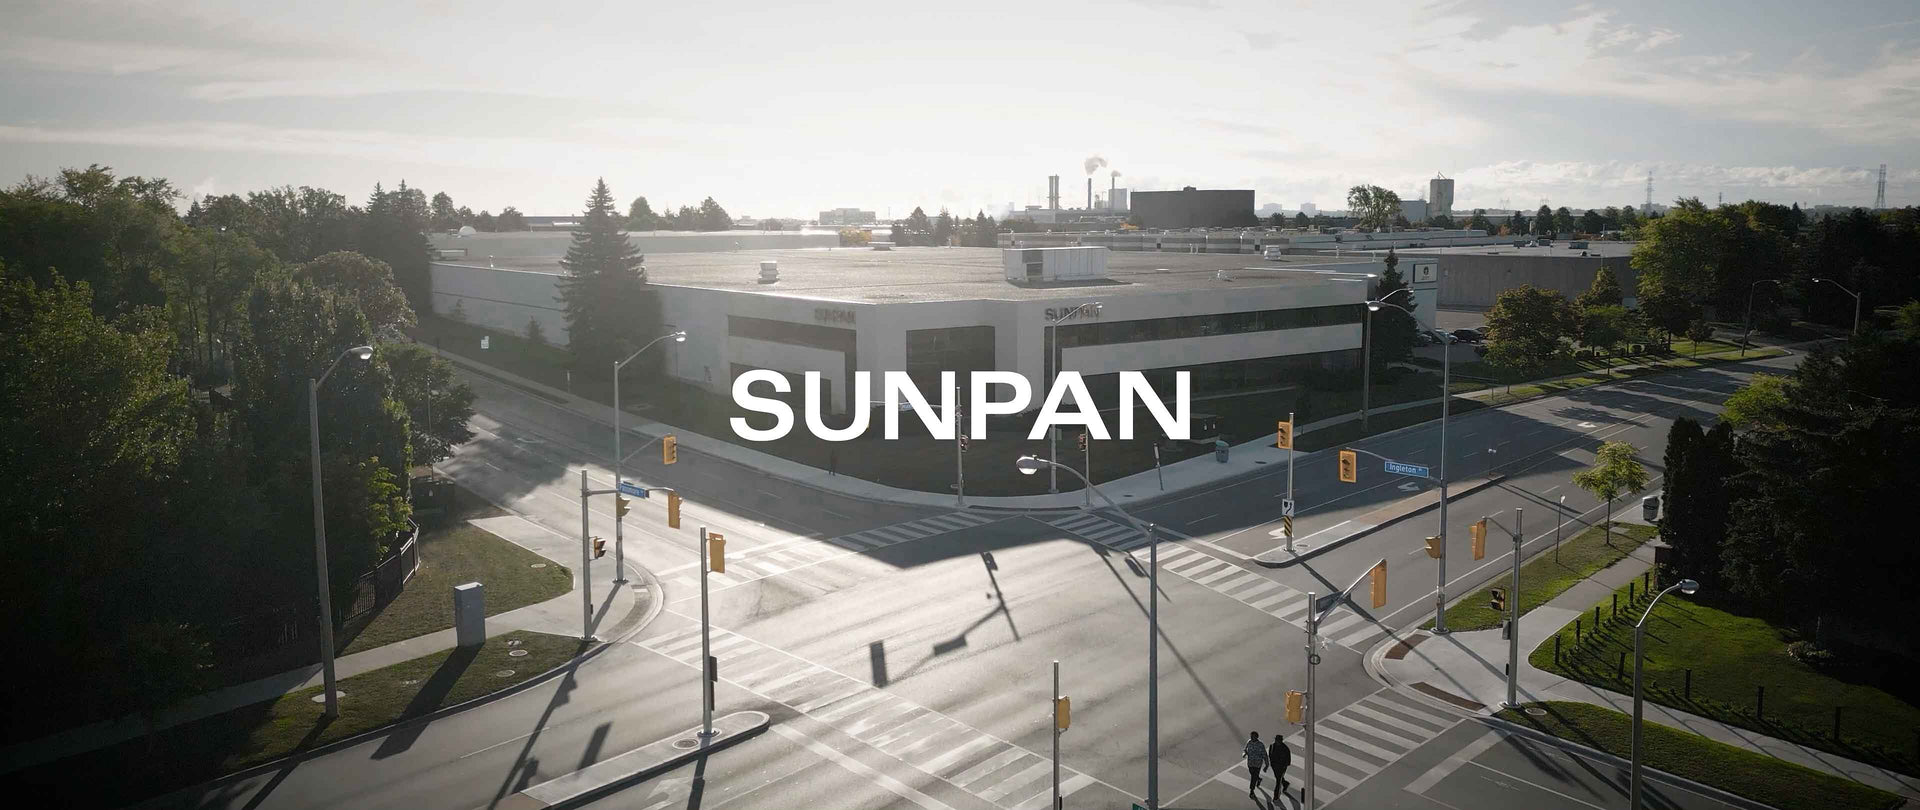 Load video: At SUNPAN, we work with manufacturers and designers all over the world to provide our customers and partners with stylish, thoughtfully-designed home furnishings that are built to last. Watch our key leadership talk about our company, how we distinguish ourselves in the furniture market, and where we see growth coming for our business.